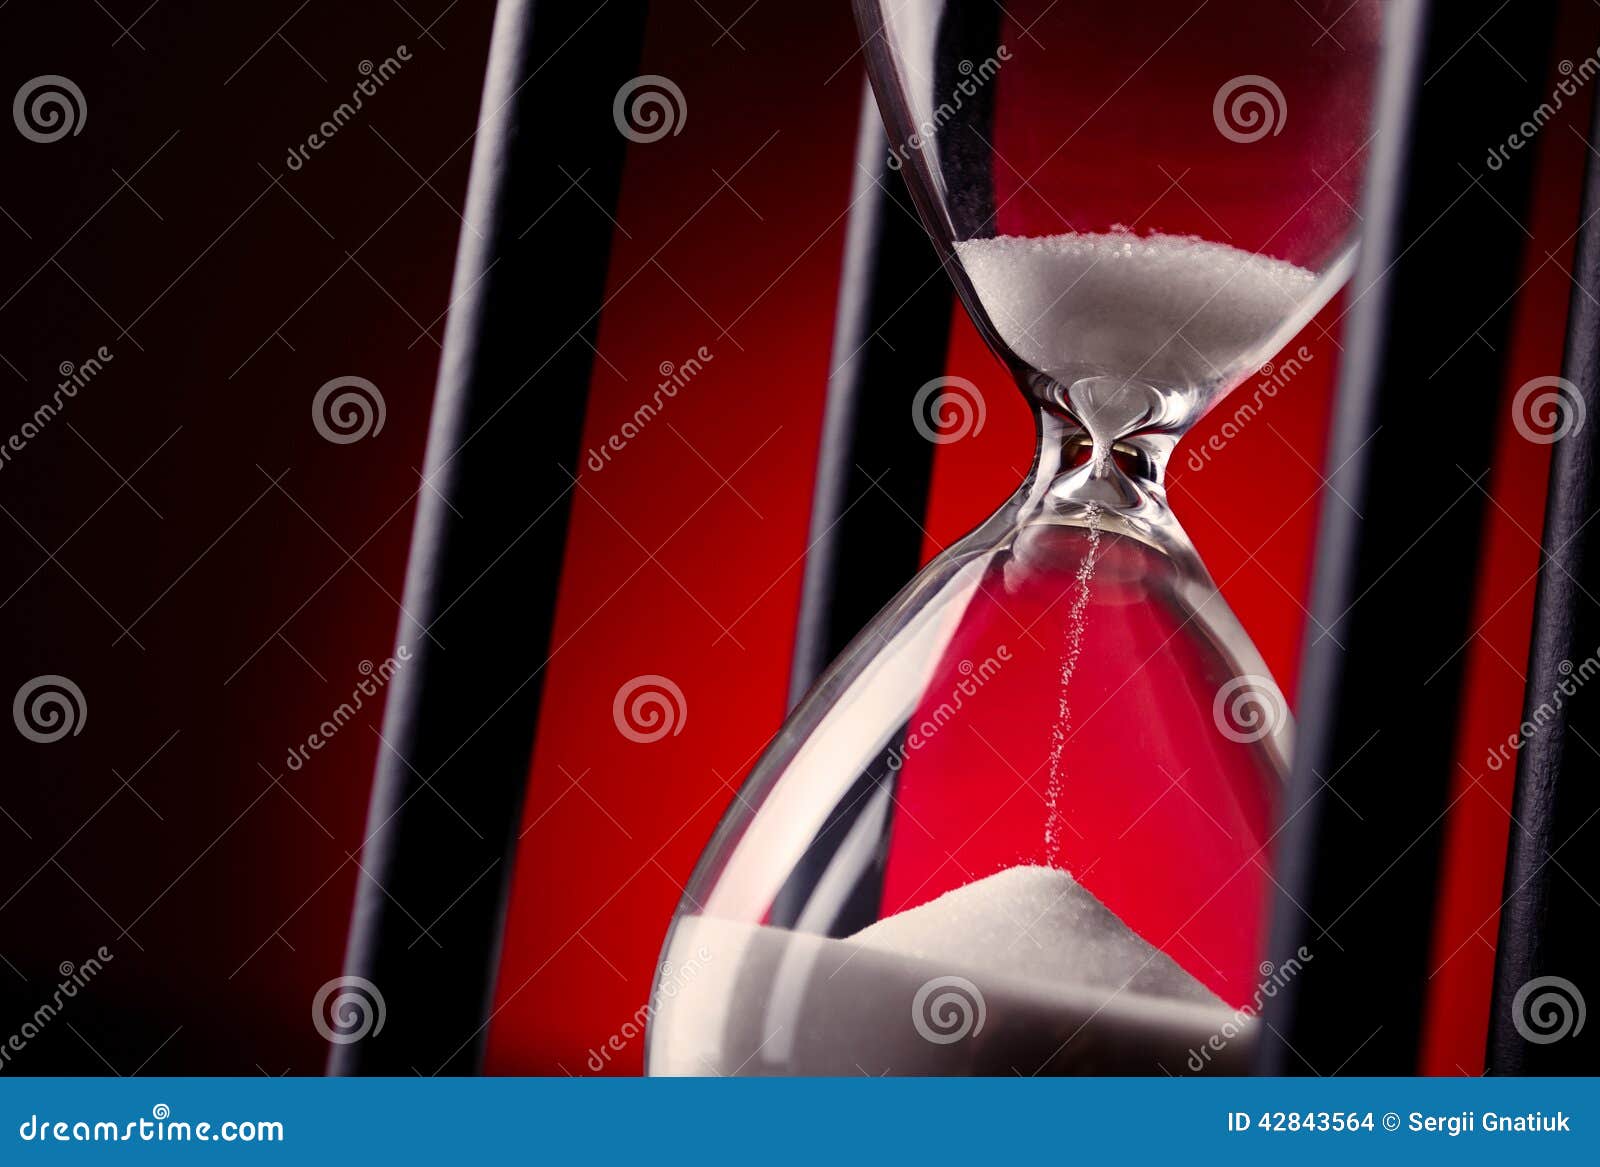 egg timer or hourglass on a red background